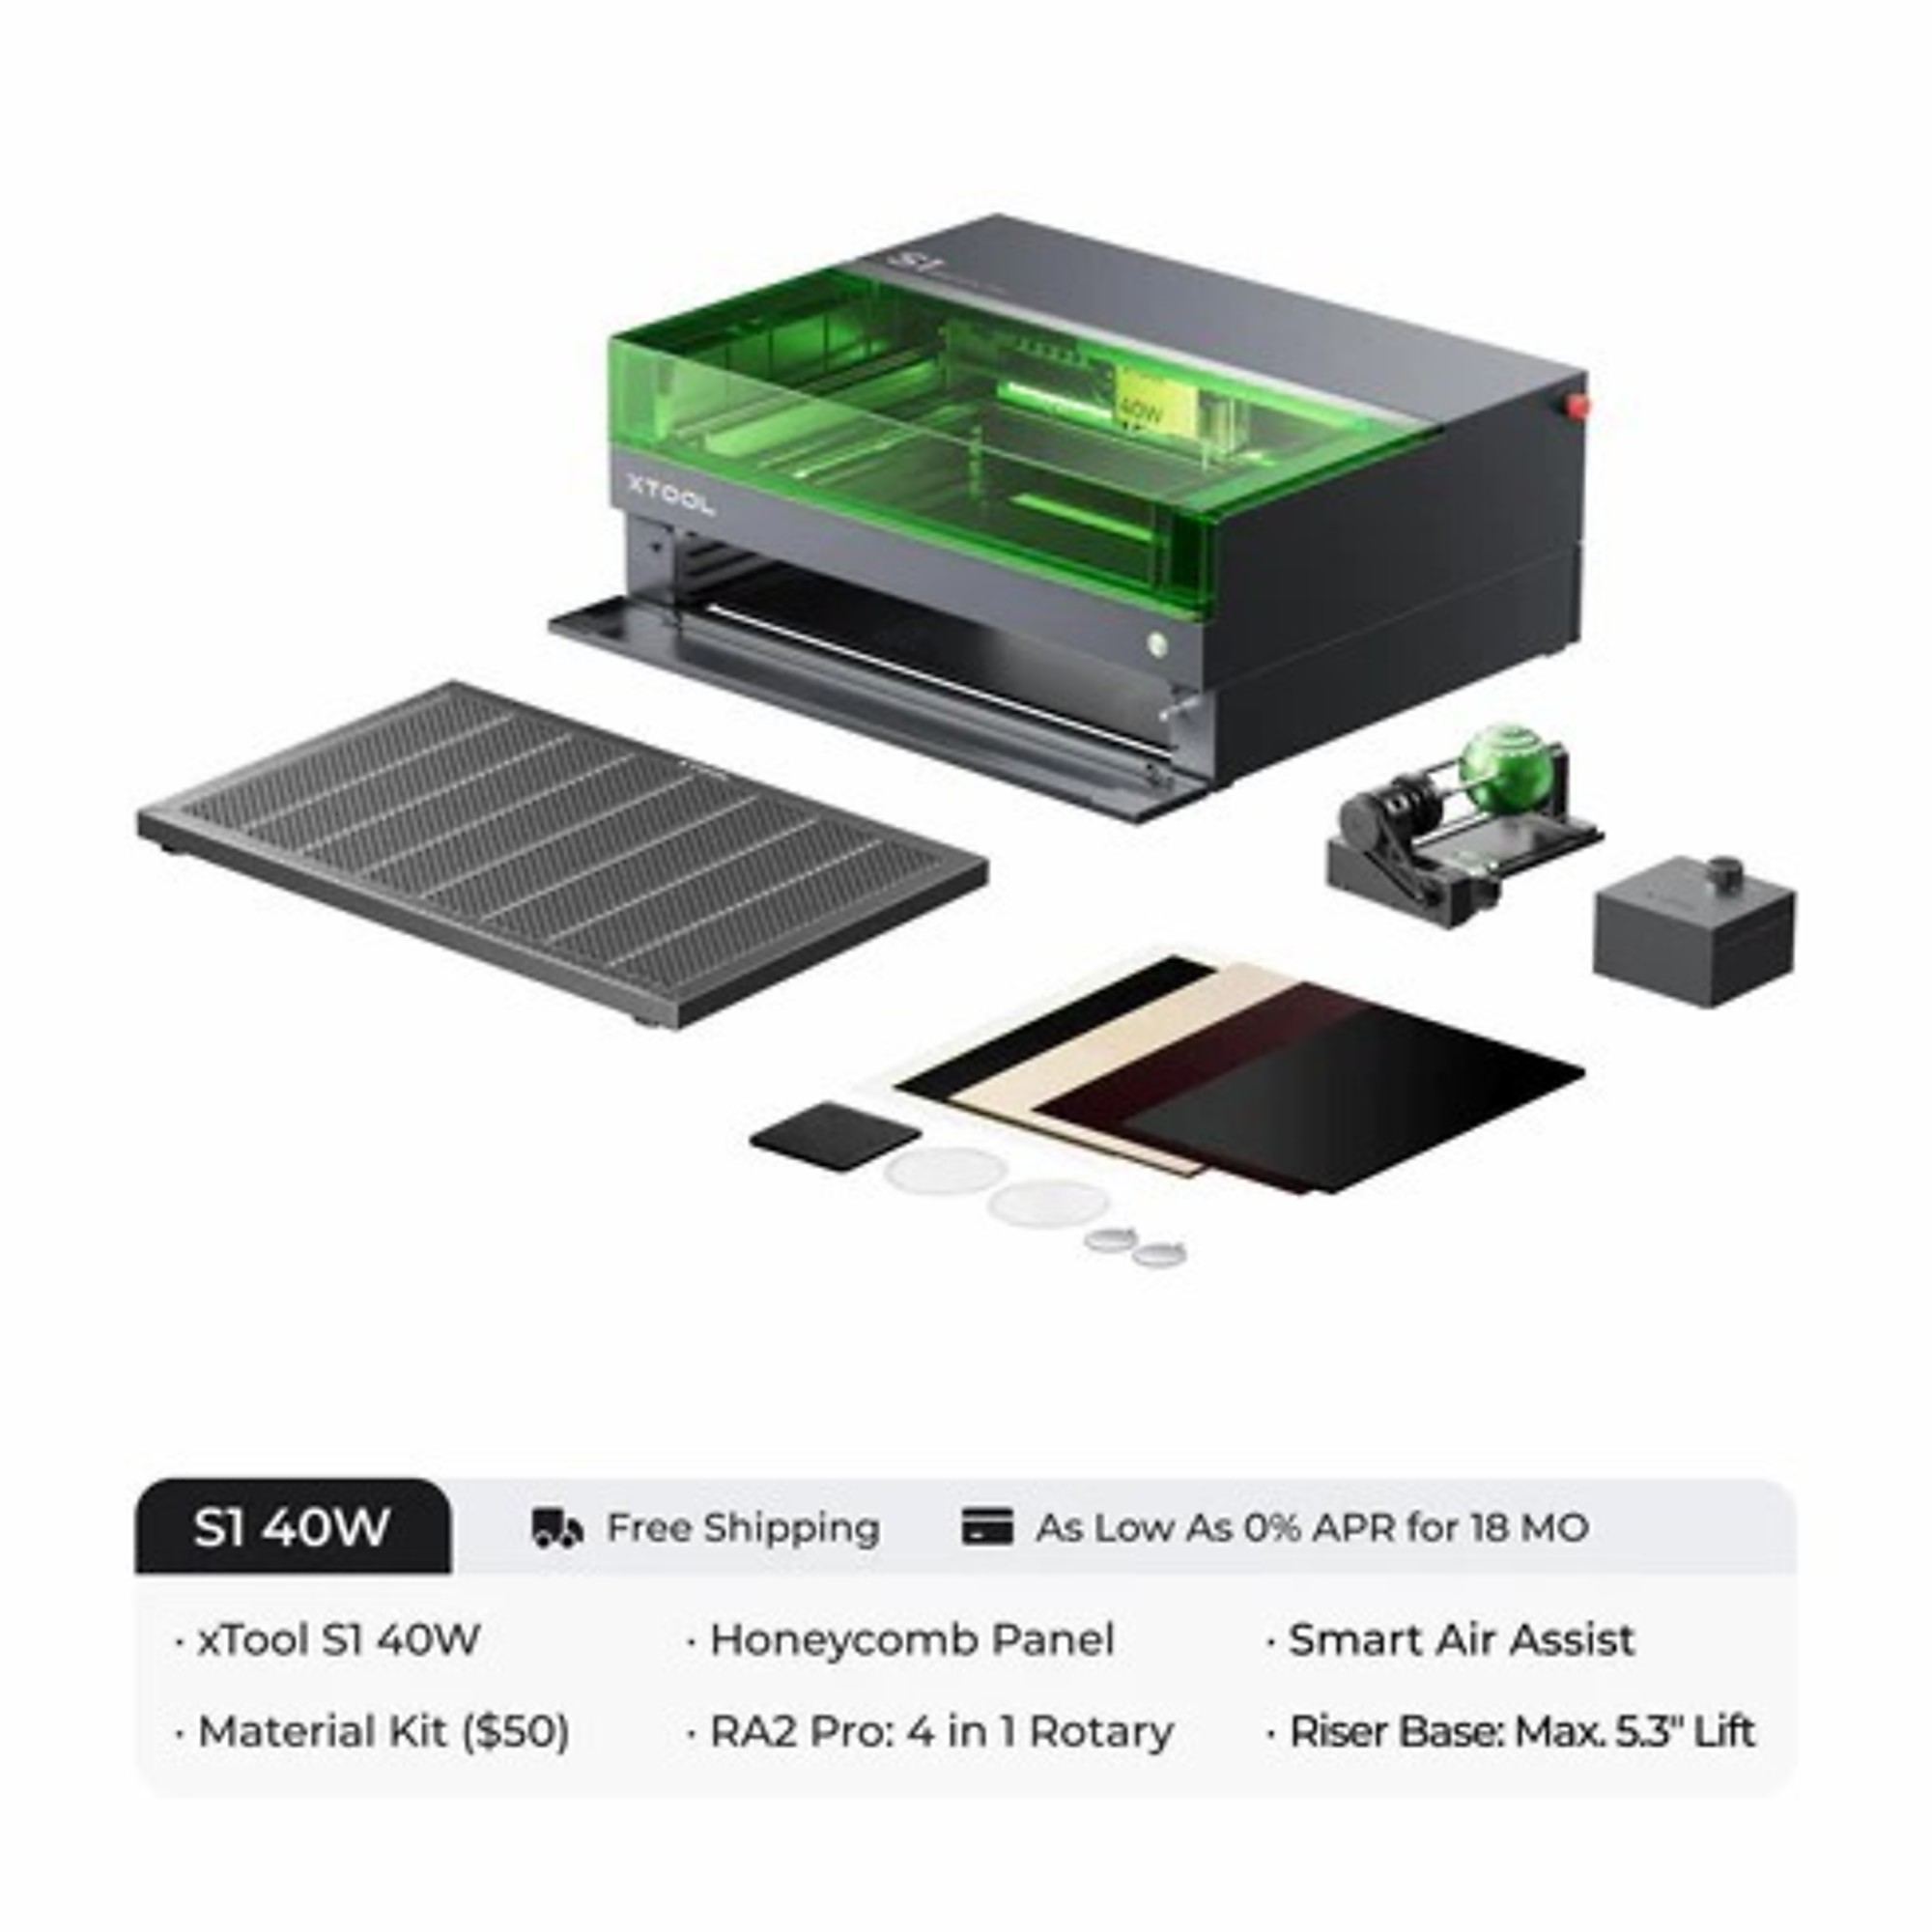 Buy xTool S1 40W with Air Assist and Honeycomb Online, Laser Engravers, XTool